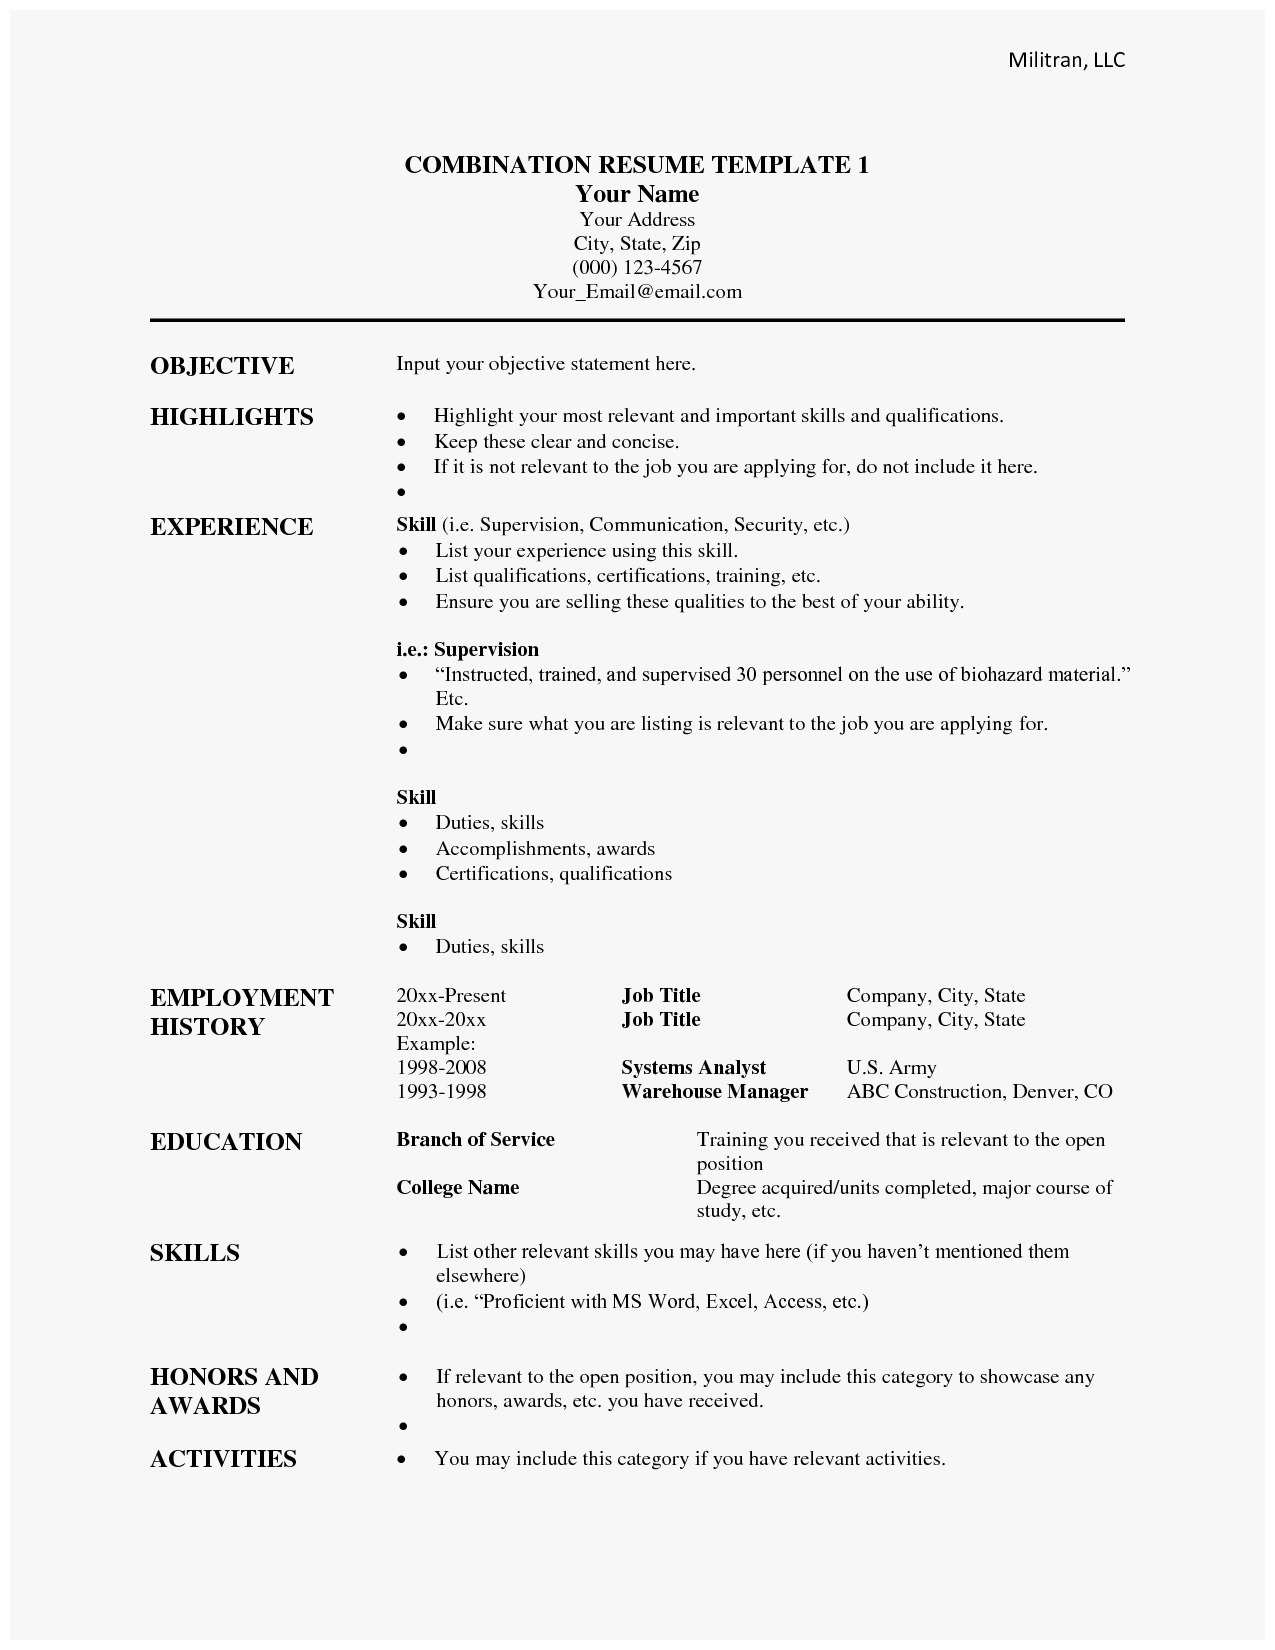 75 Admirable Stocks Of Combination Resume Sample | Best Of Pertaining To Combination Resume Template Word